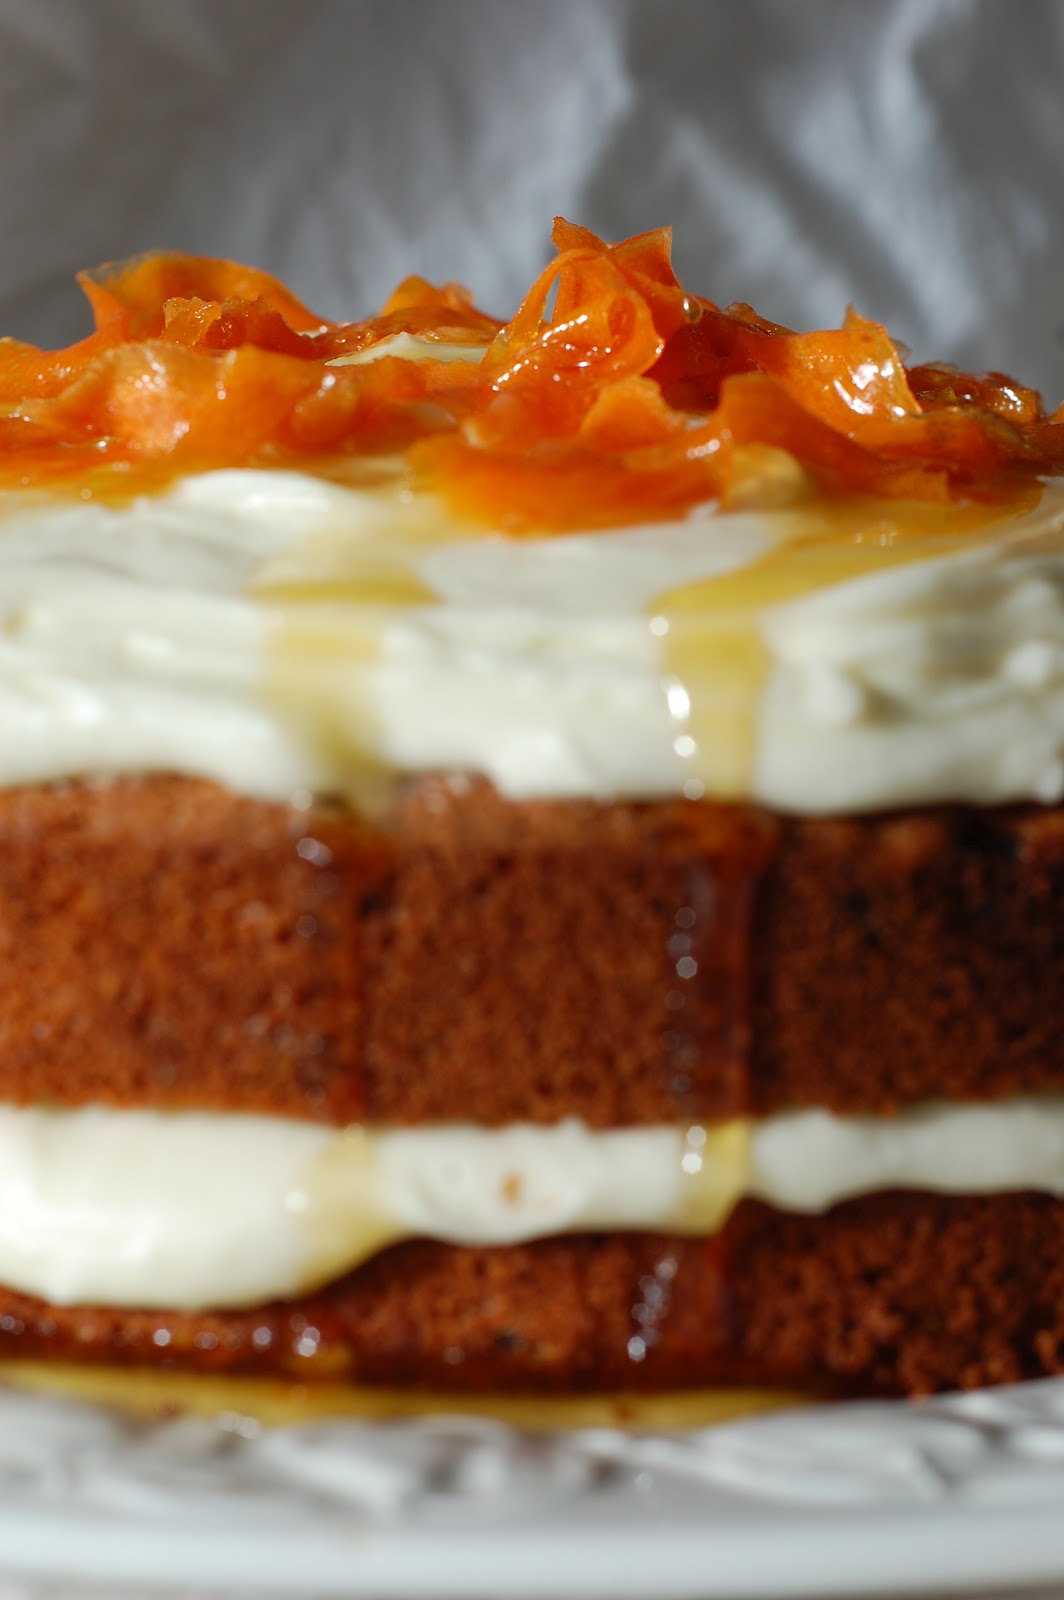 carrot cake slice Very Carroty Carrot Cake with Candied Carrot.